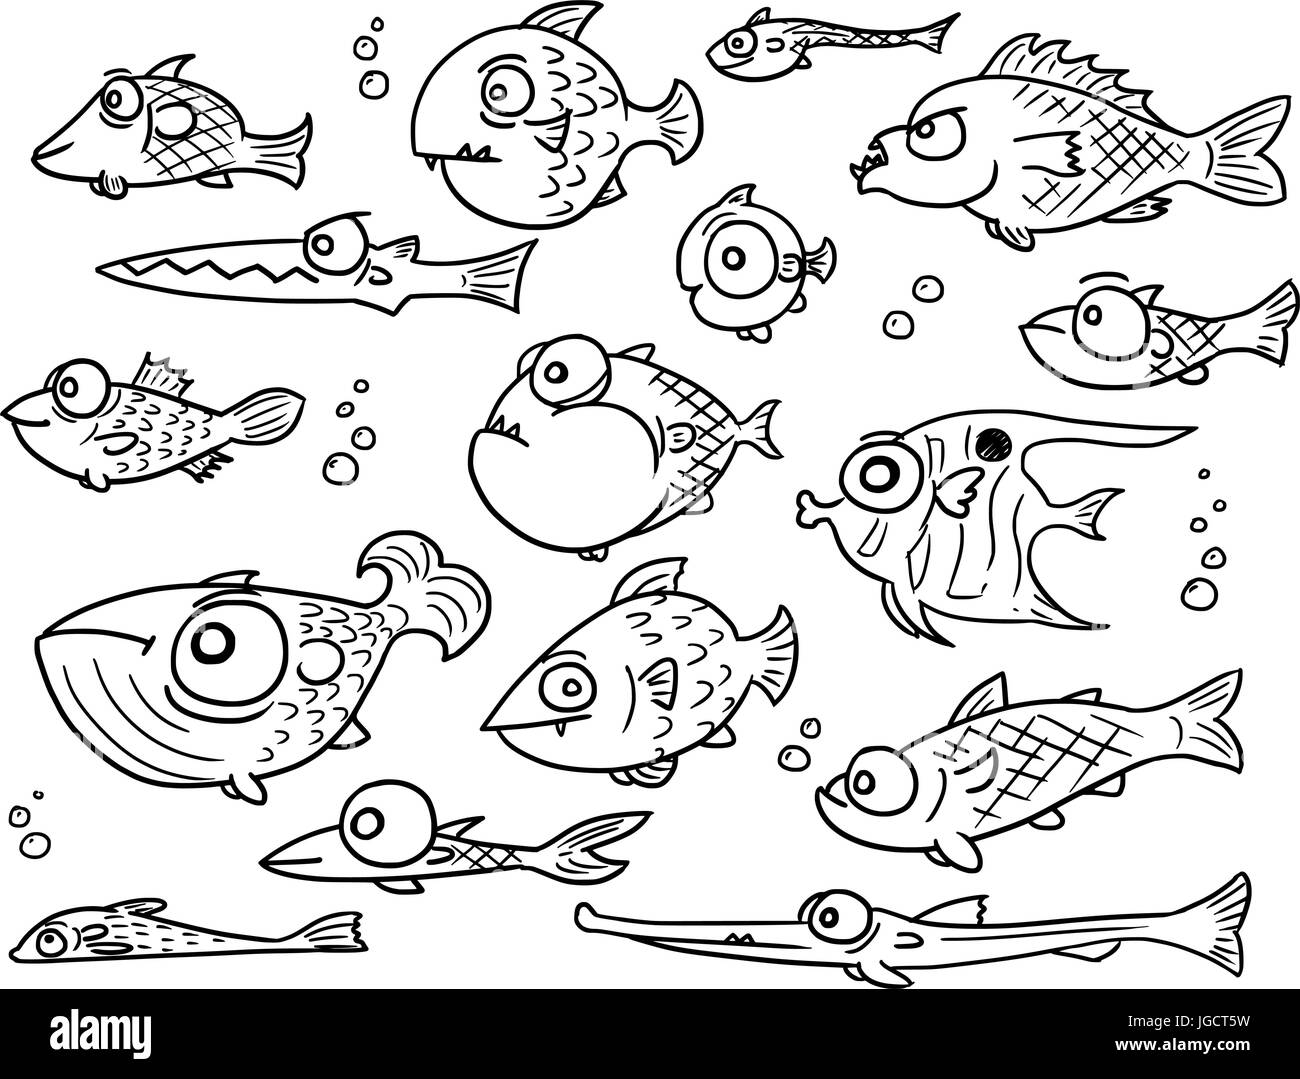 Set or collection of various cute vector Cartoon fish designs Stock Vector